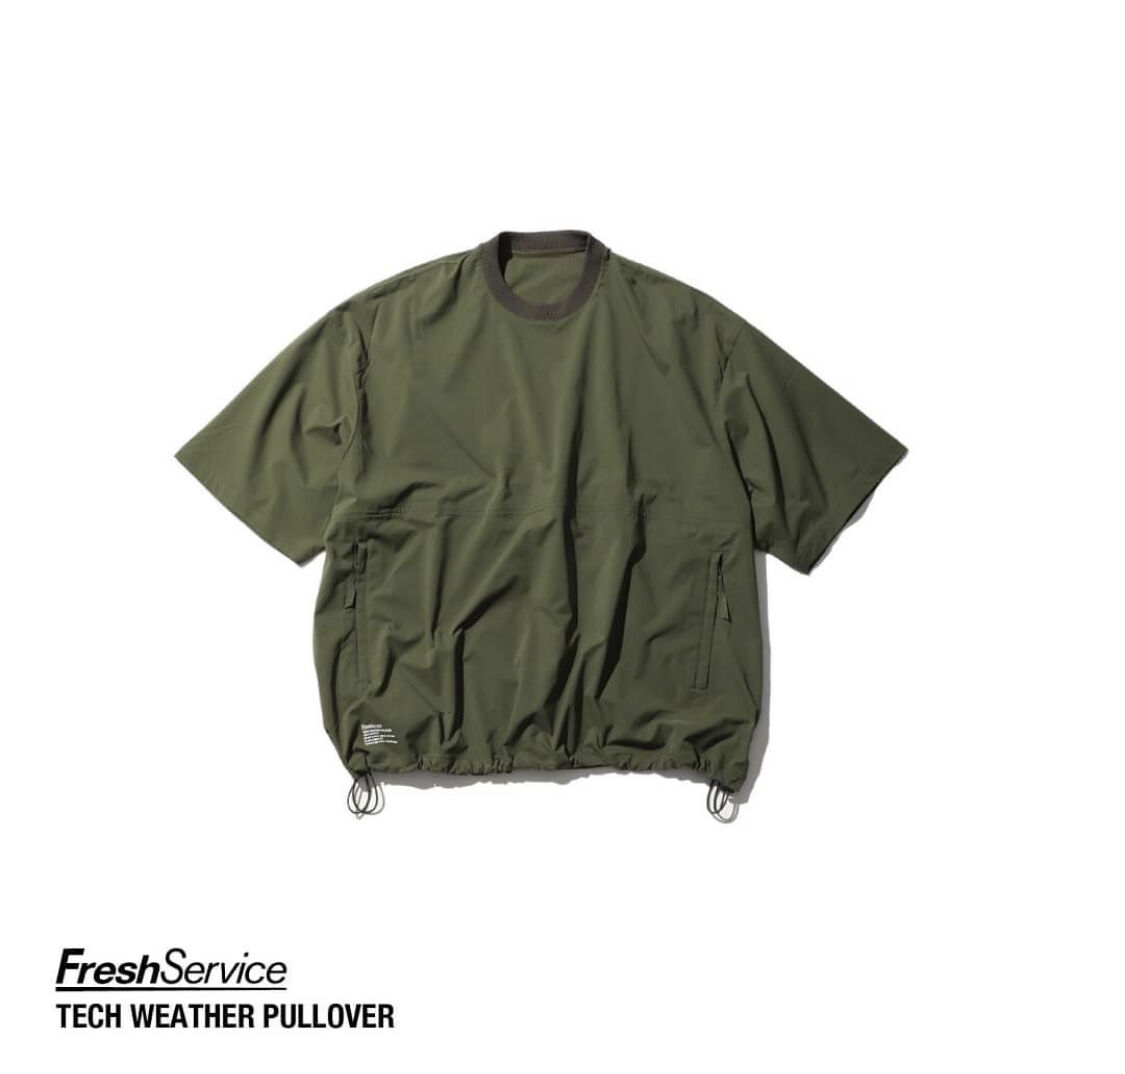 FreshService “TECH WEATHER PULLOVER” | MAROON